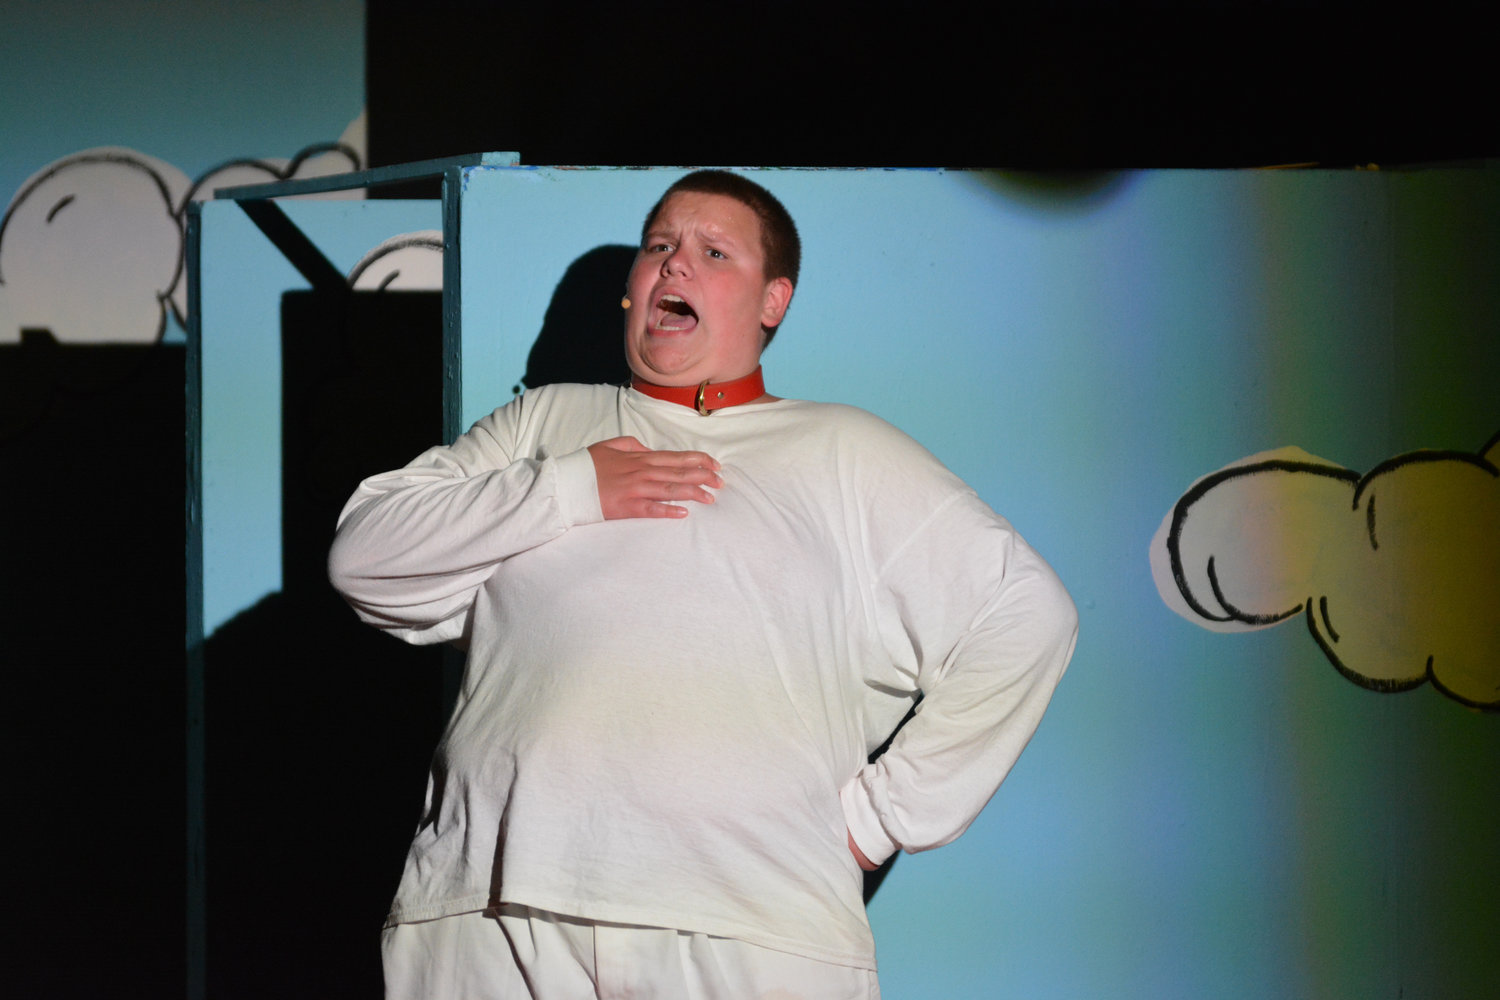 “Snoopy” made the most of his solo performance in the midst of the Tenino Young at Heart Theatre’s play, “You’re a Good Man, Charlie Brown.”